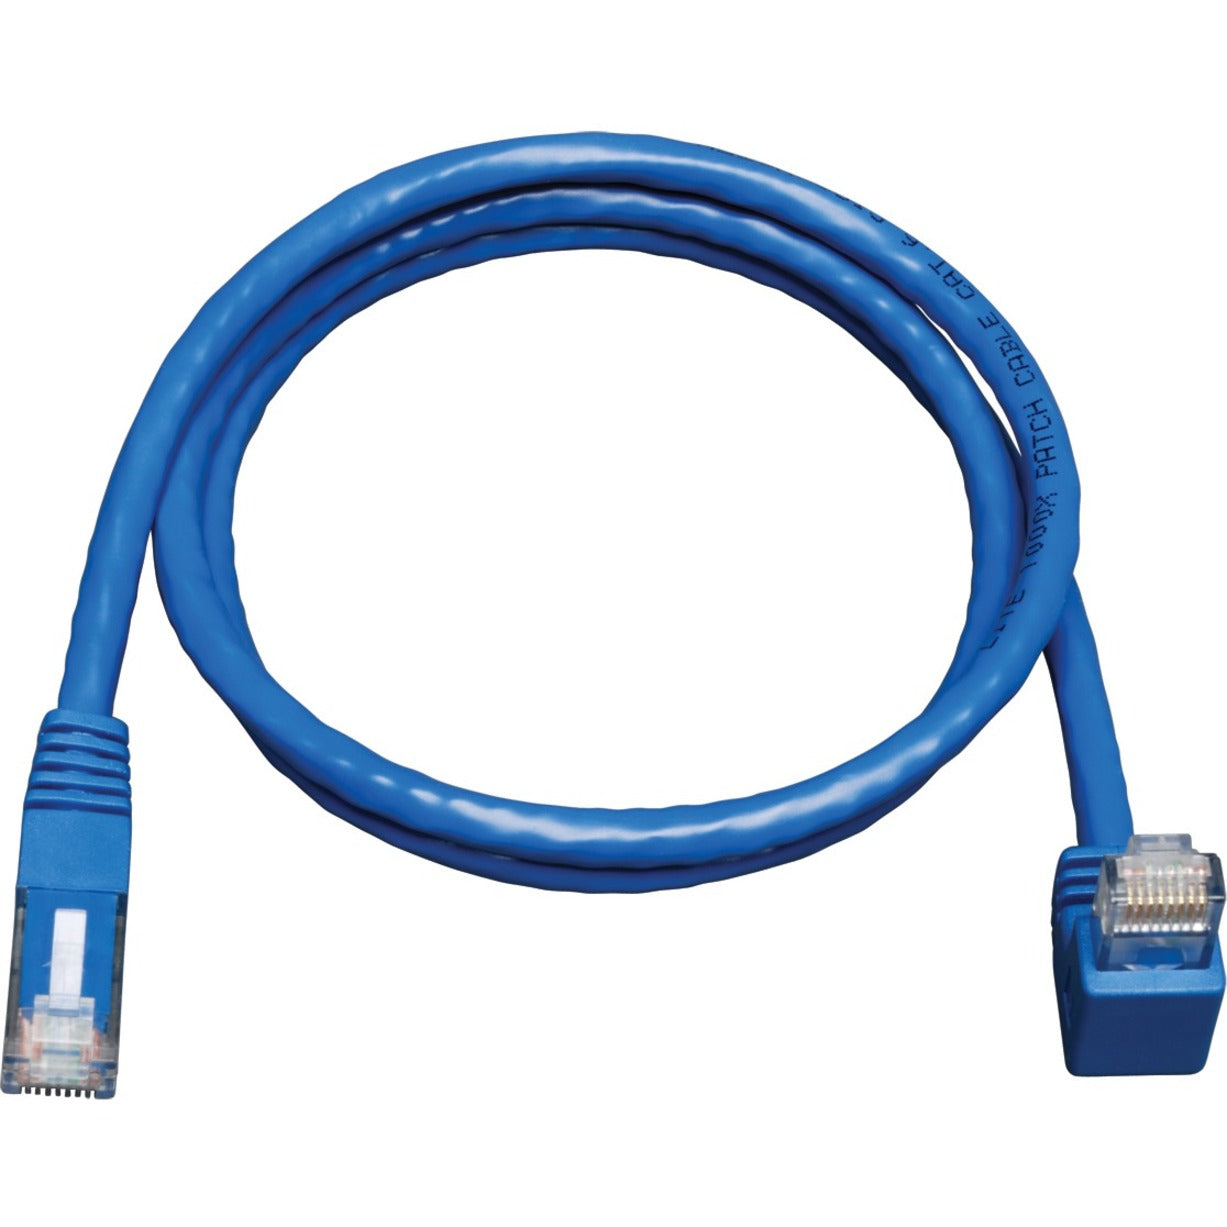 Tripp Lite N204-005-BL-DN Cat6 Patch Cable, 5 ft, Molded, Right-angled Connector, Stranded, Blue